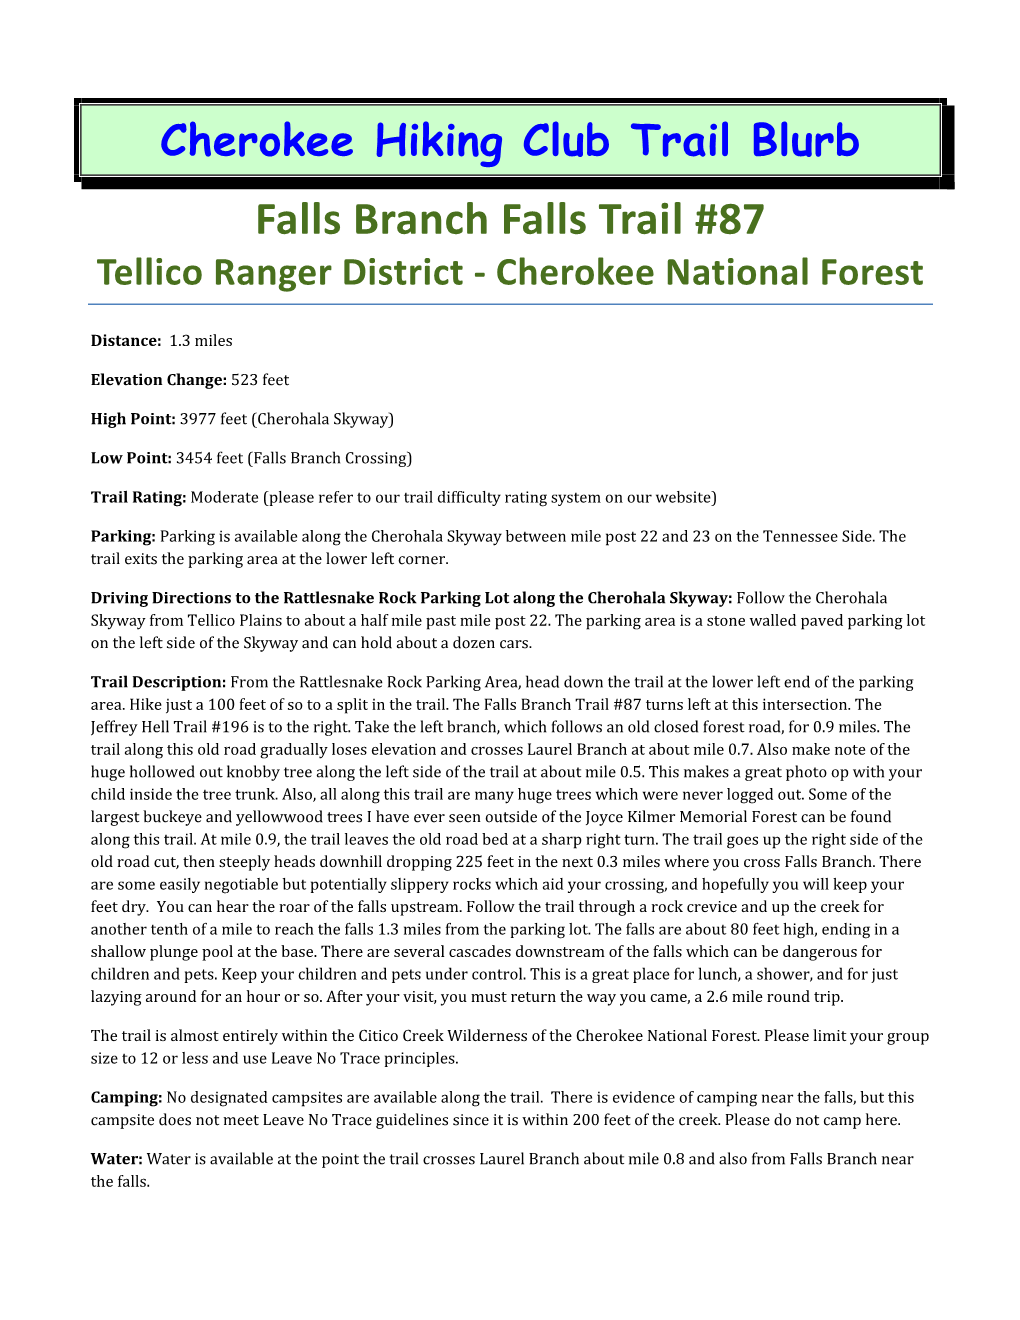 Falls Branch Falls Trail #87 Tellico Ranger District ‐ Cherokee National Forest